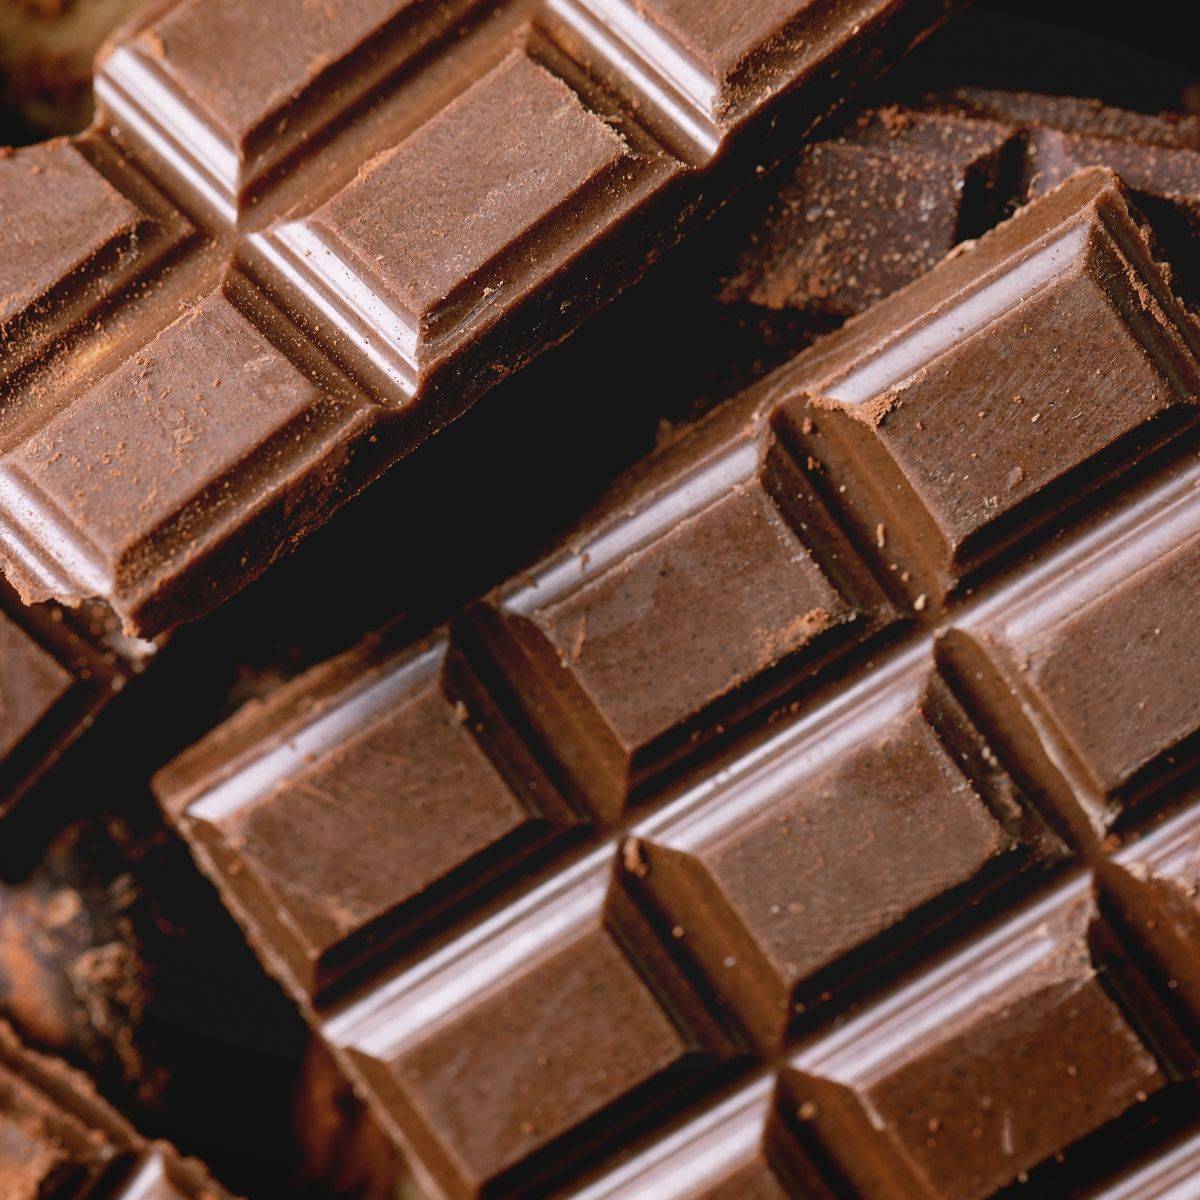 Does Chocolate Cause Pimples?